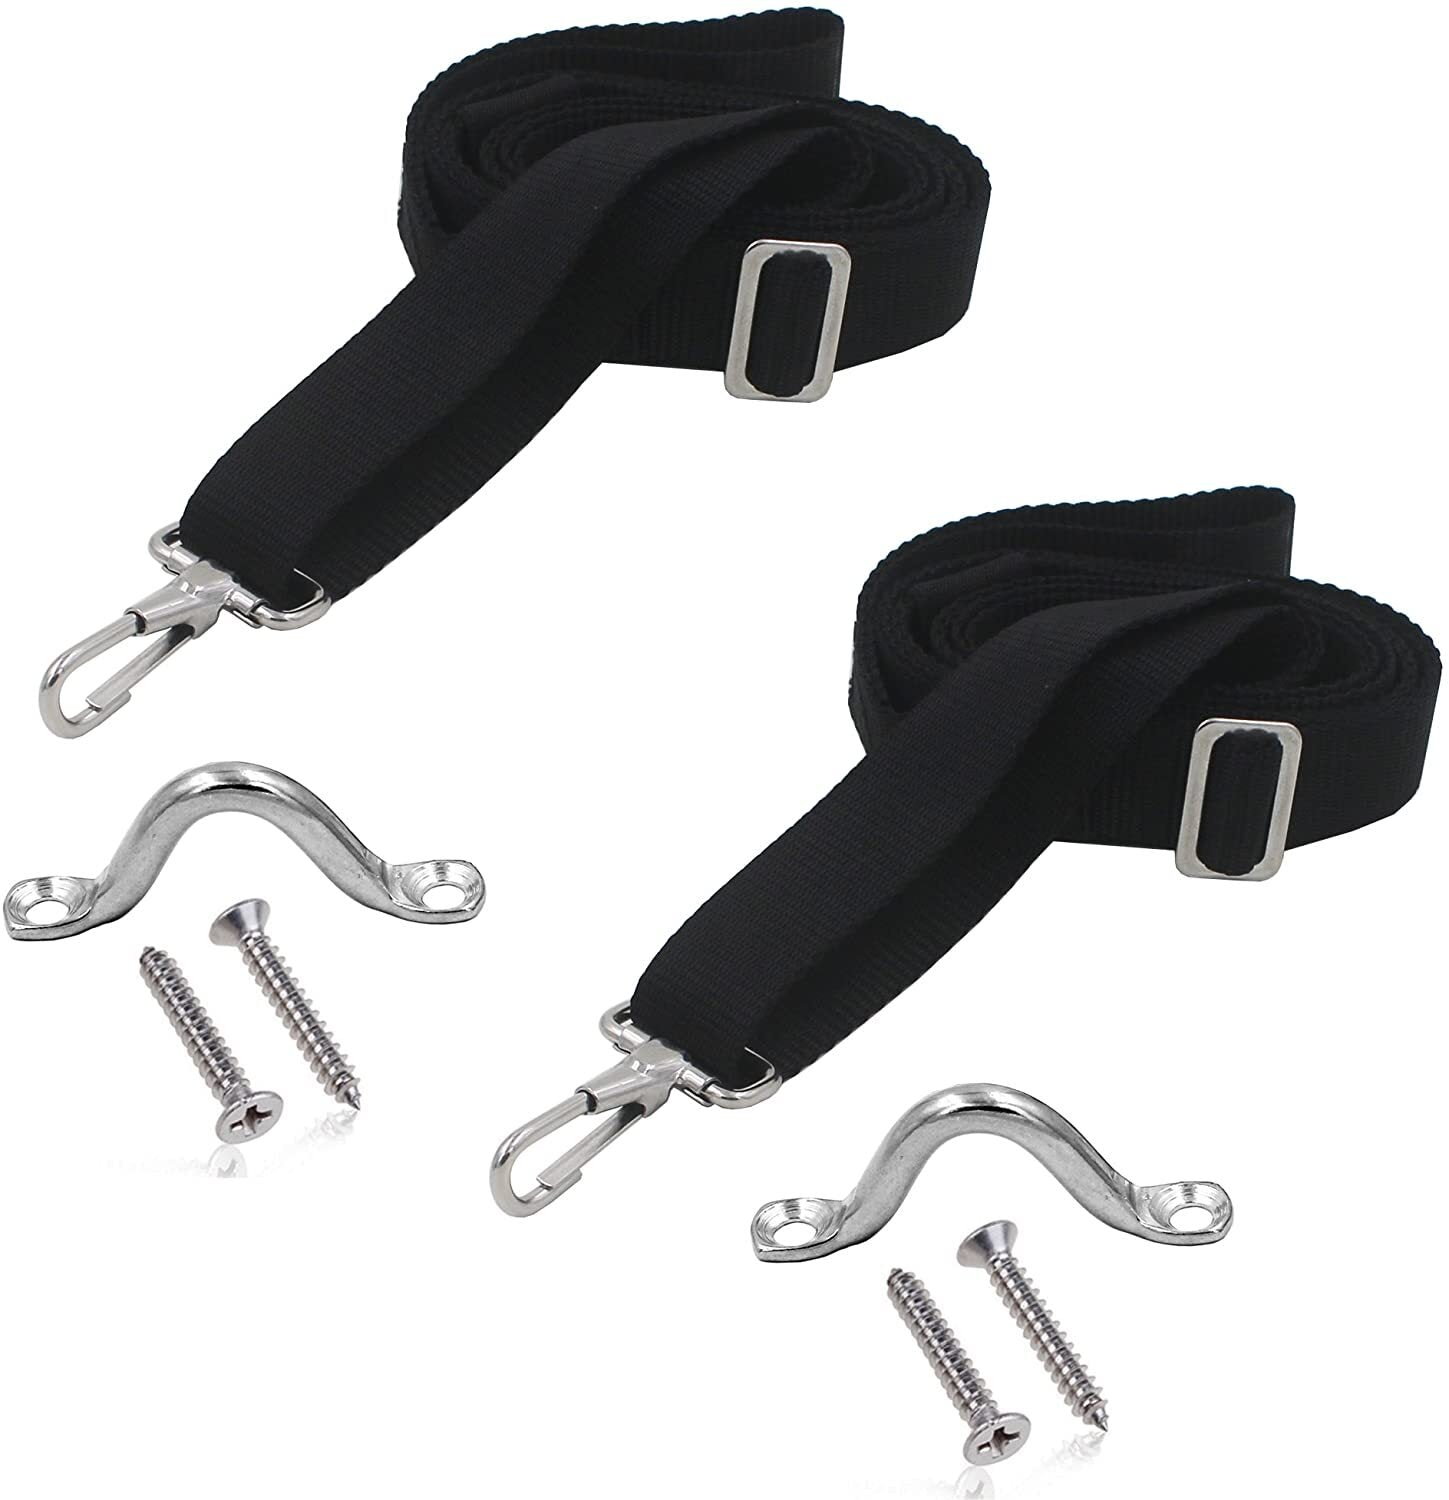 2 x Strap Hook Saddle fitting for Bimini Top Boat Canopy